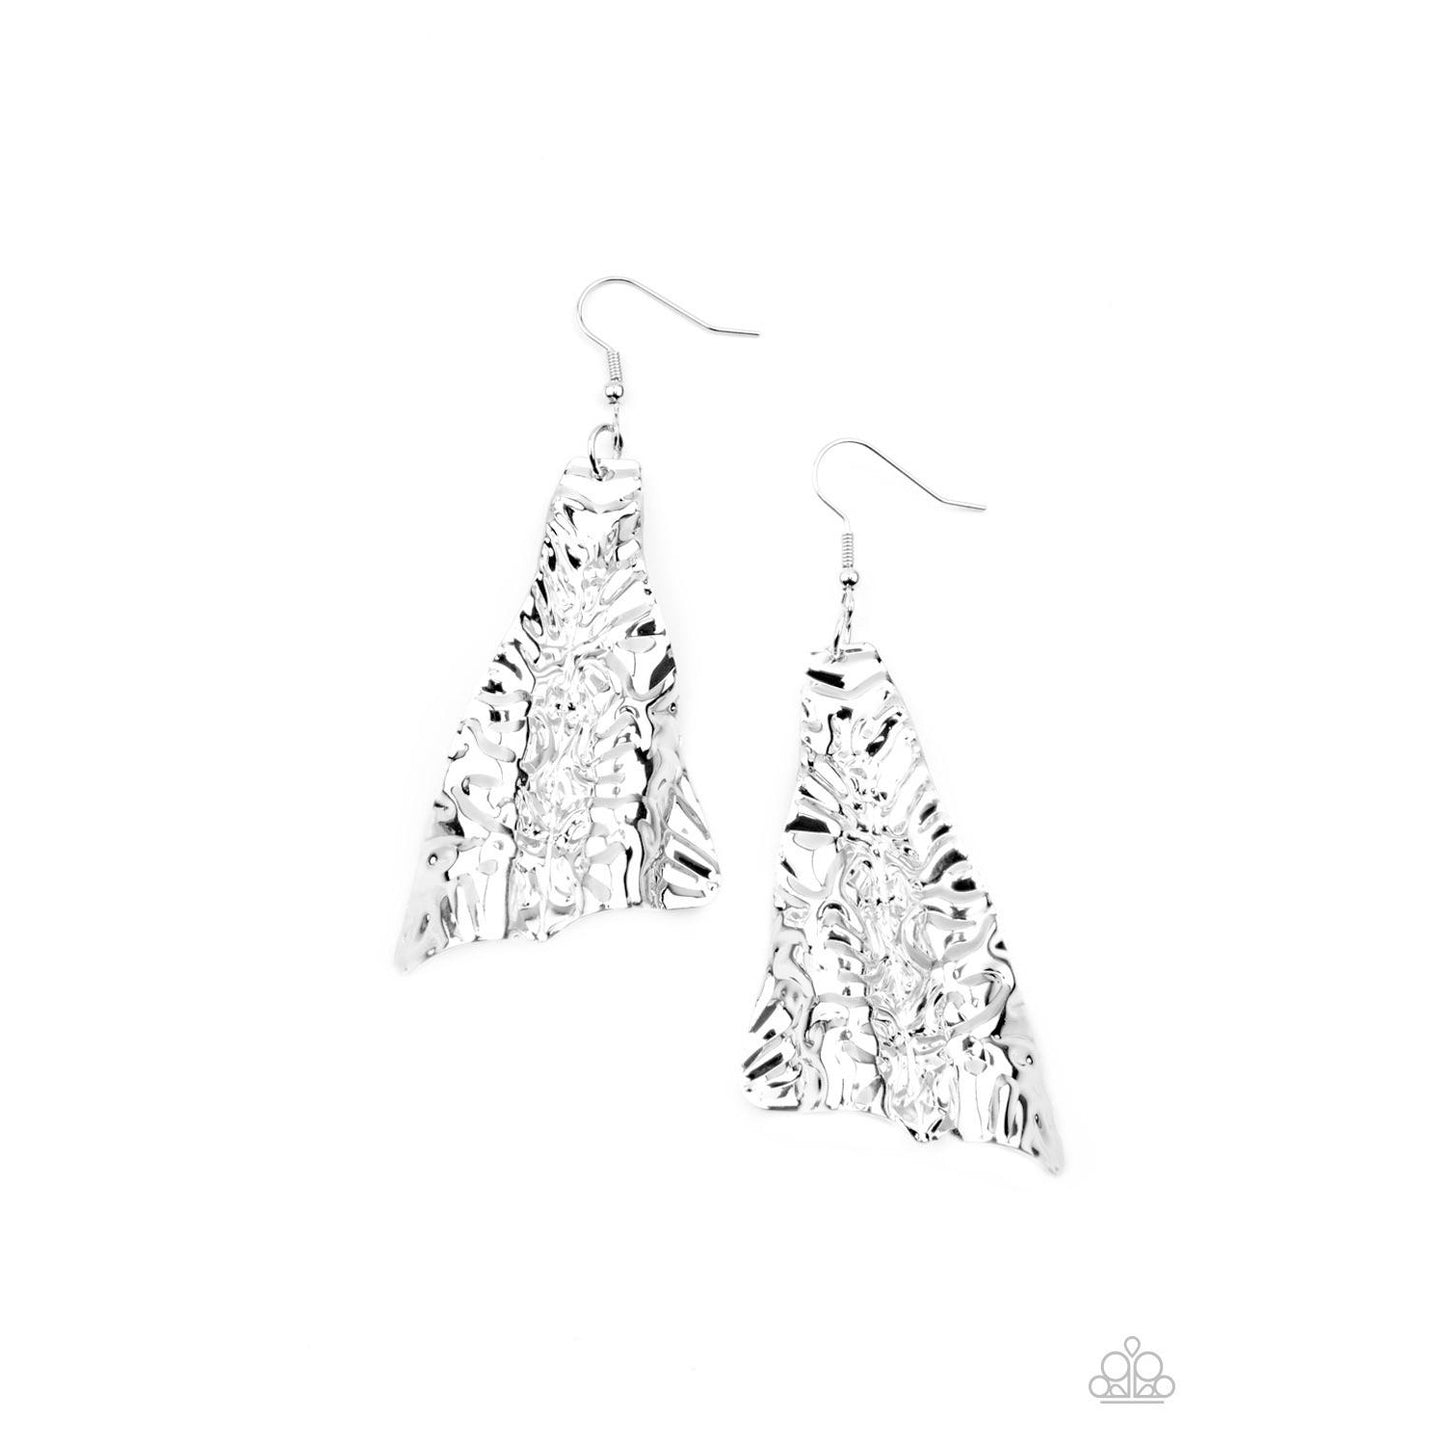 How FLARE You! - Silver Earrings 772